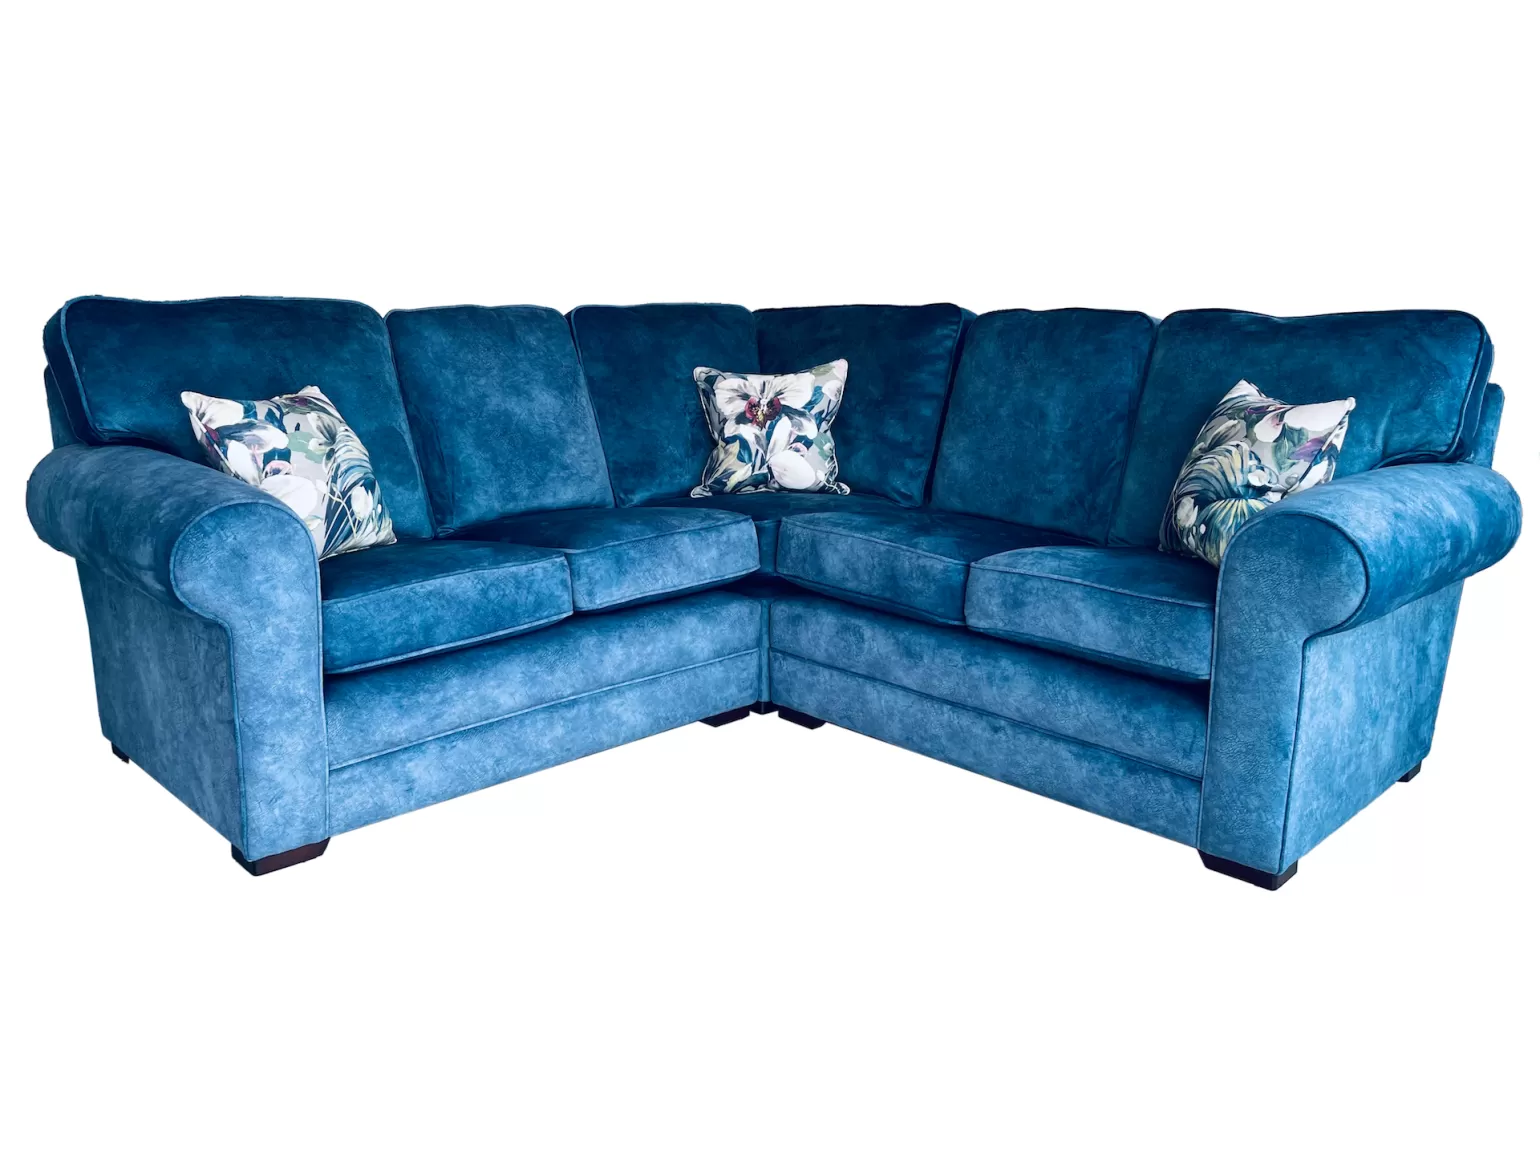 A stunning cornergroup which can be made completely bespoke to size and shape.

The comfort offered from the Chatsworth range is an inviting cosy seat, with a high back cushion.
